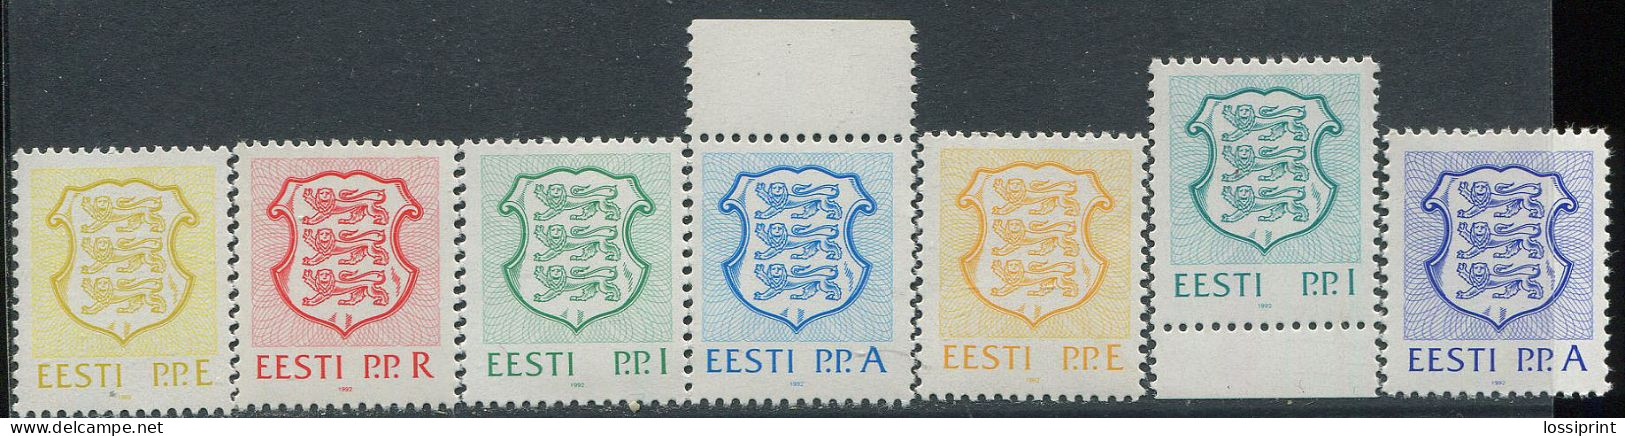 Estonia:Unused Stamps Serie Coat Of Arms, P.P.E, P.P.R, P.P.I And P.P.A Full Serie, 1992, MNH - Timbres